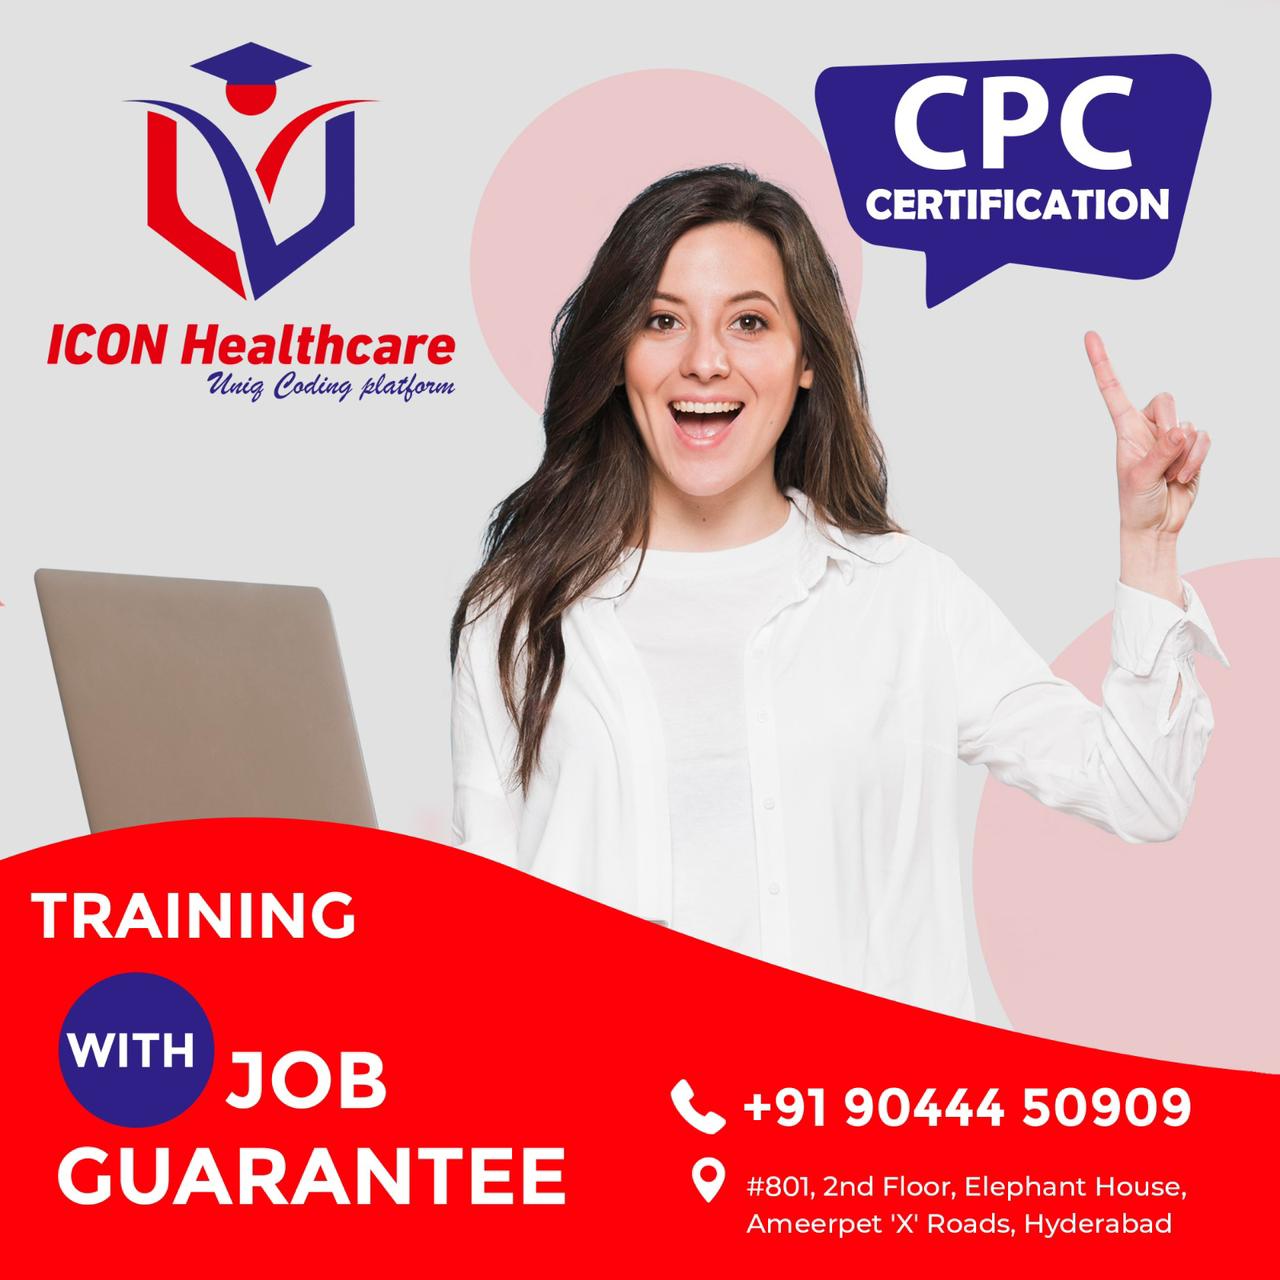 MEDICAL CODING COURSE ONLINE FREE WITH CERTIFICATE - Andhra Pradesh - Hyderabad ID1517930 2